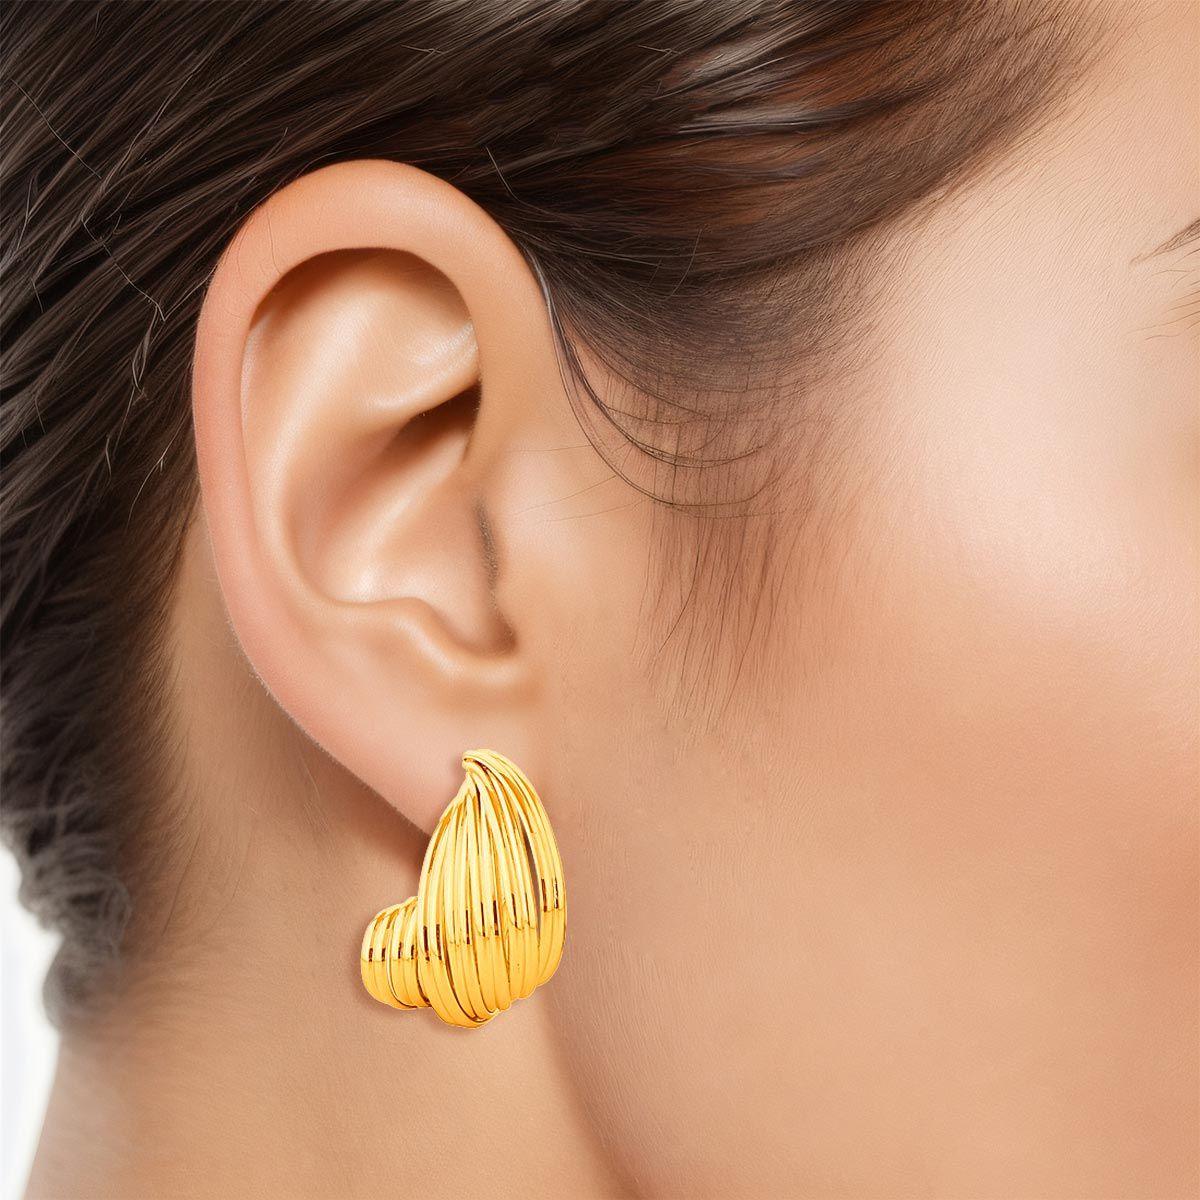 Gleam Gold Spiral Small Earrings for Fashion Jewelry Devotees